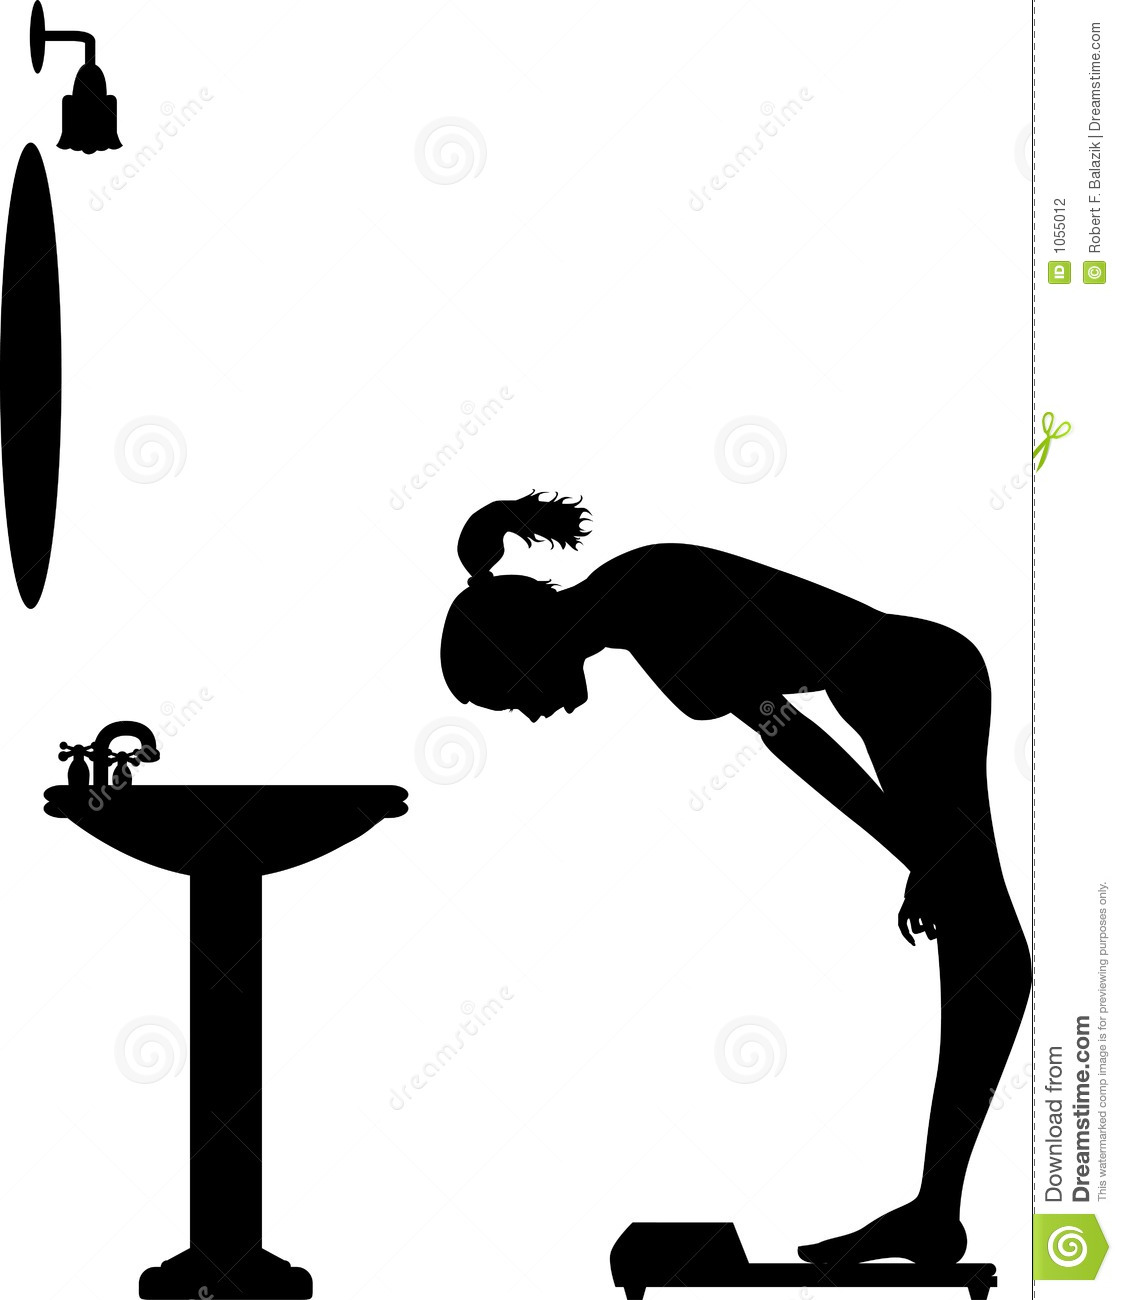 Silhouette Graphic Depicting A Woman Weighing Herself On A Bathroom